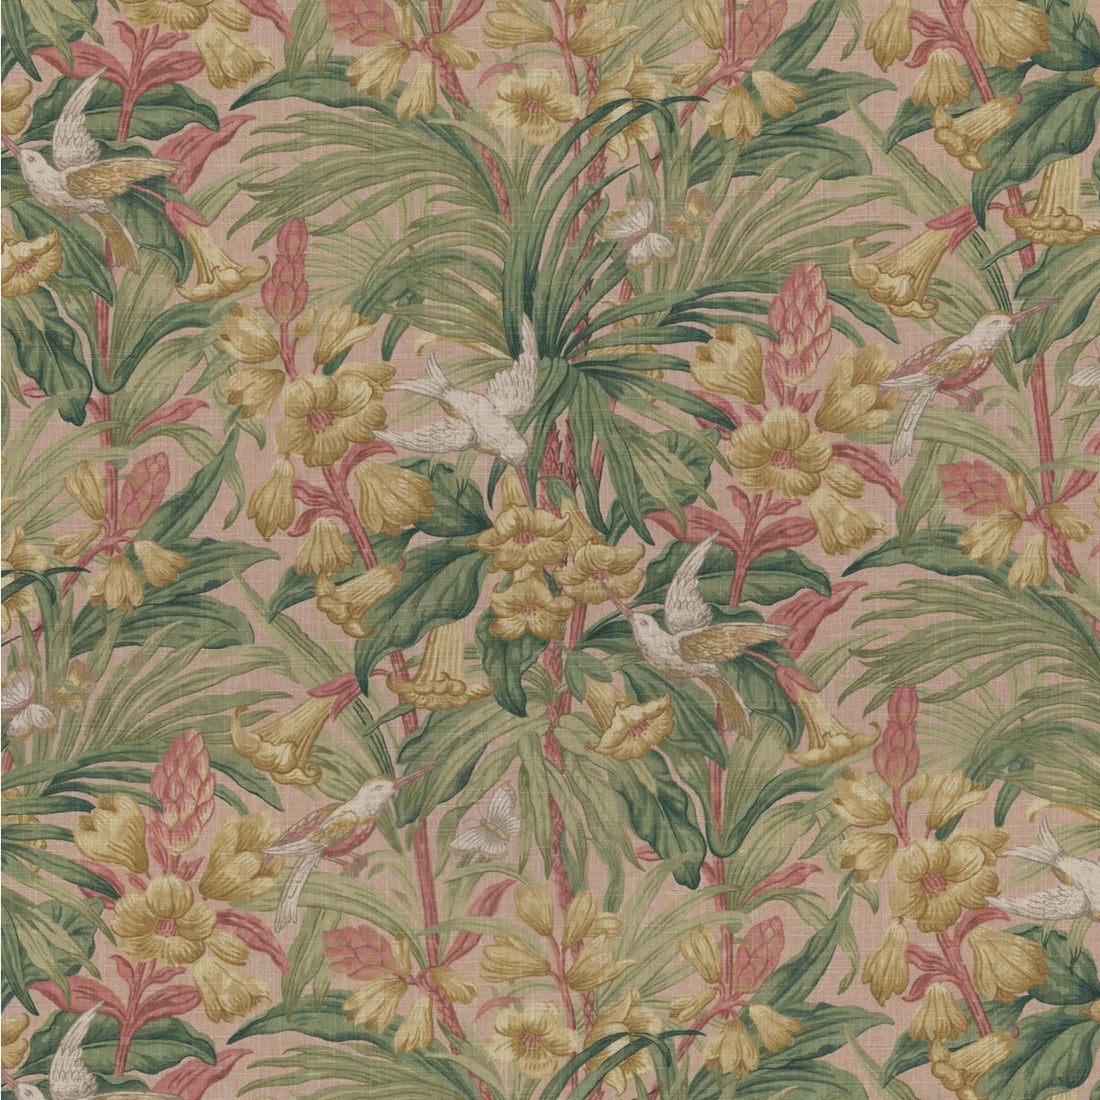 Trumpet Flowers fabric in blush color - pattern BP10982.2.0 - by G P &amp; J Baker in the Original Brantwood Fabric collection